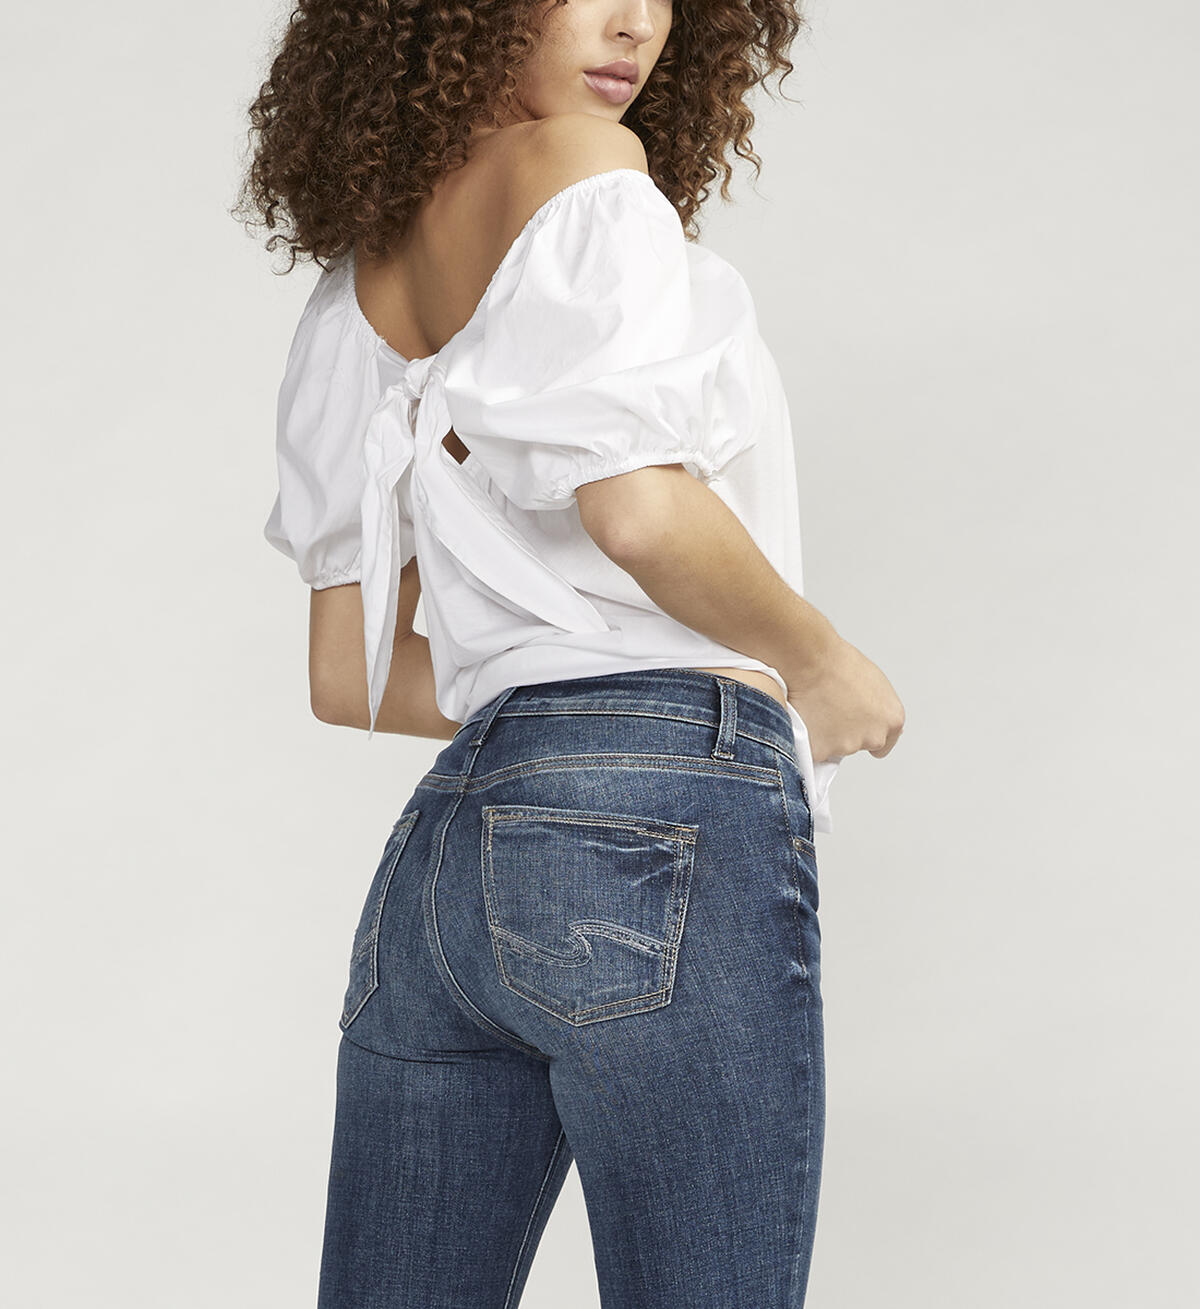 Avery High Rise Slim Bootcut Jeans, , hi-res image number 4